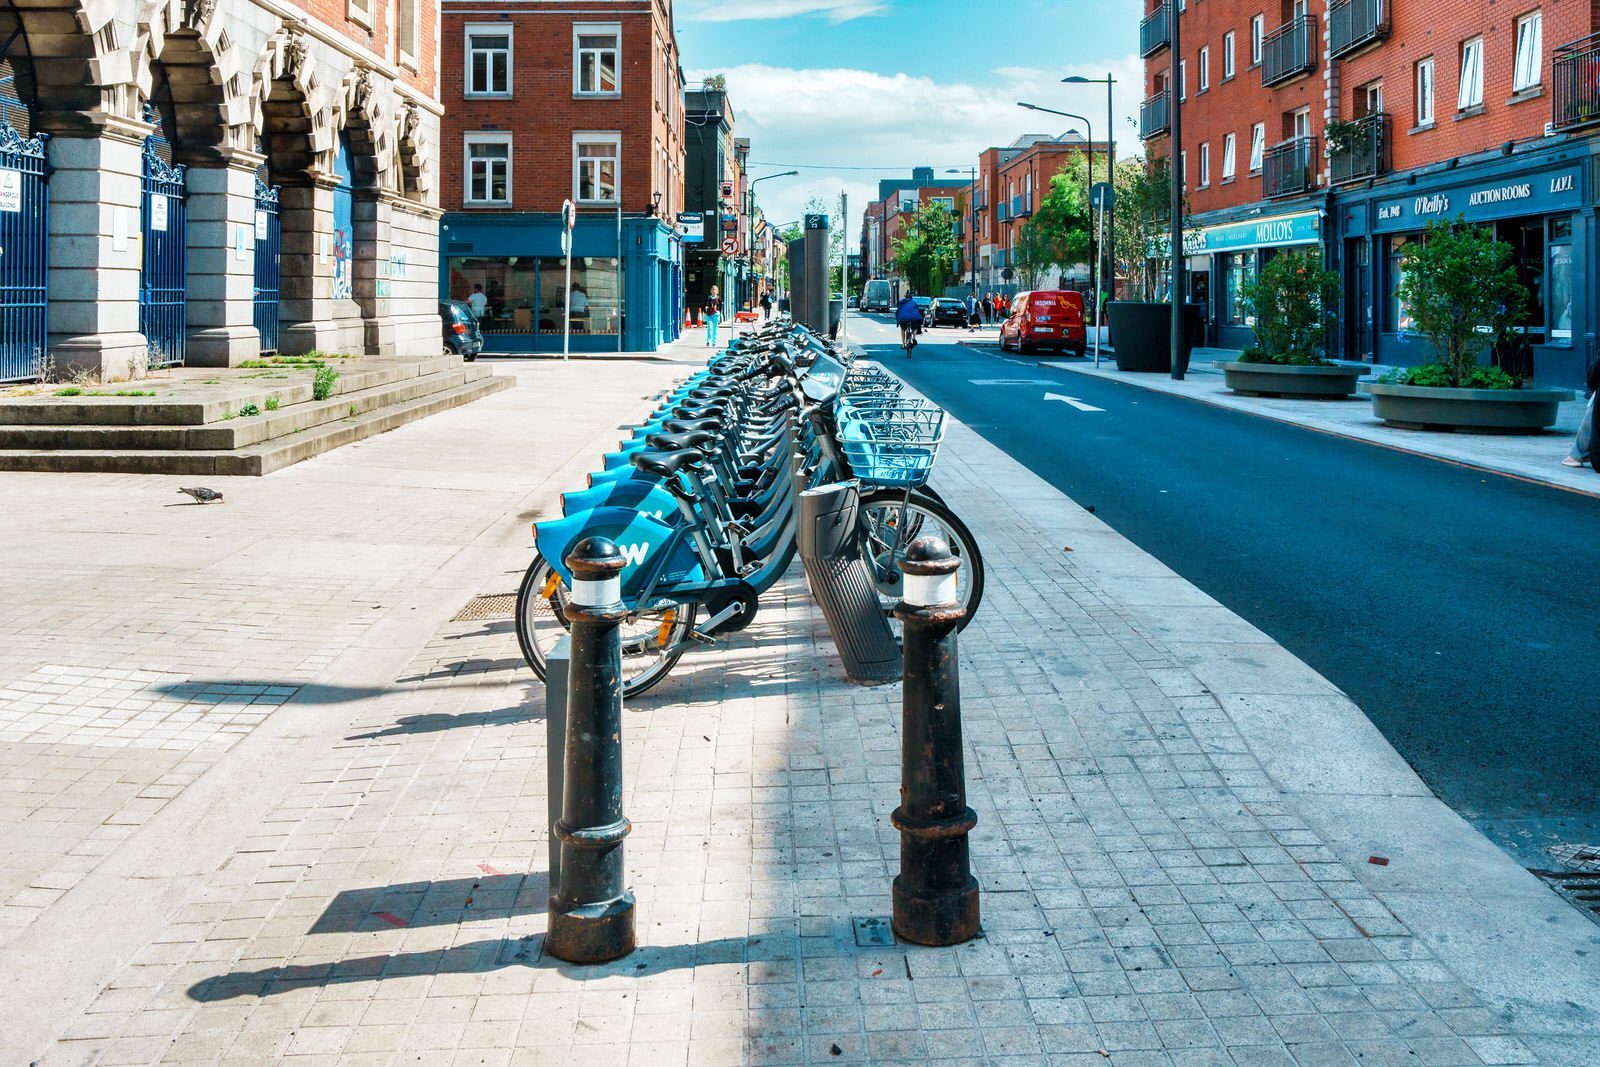 DUBLINBIKES DOCKING STATION 73 [AT THE OLD IVEAGH MARKETS BUILDING ON FRANCIS STREET] 009